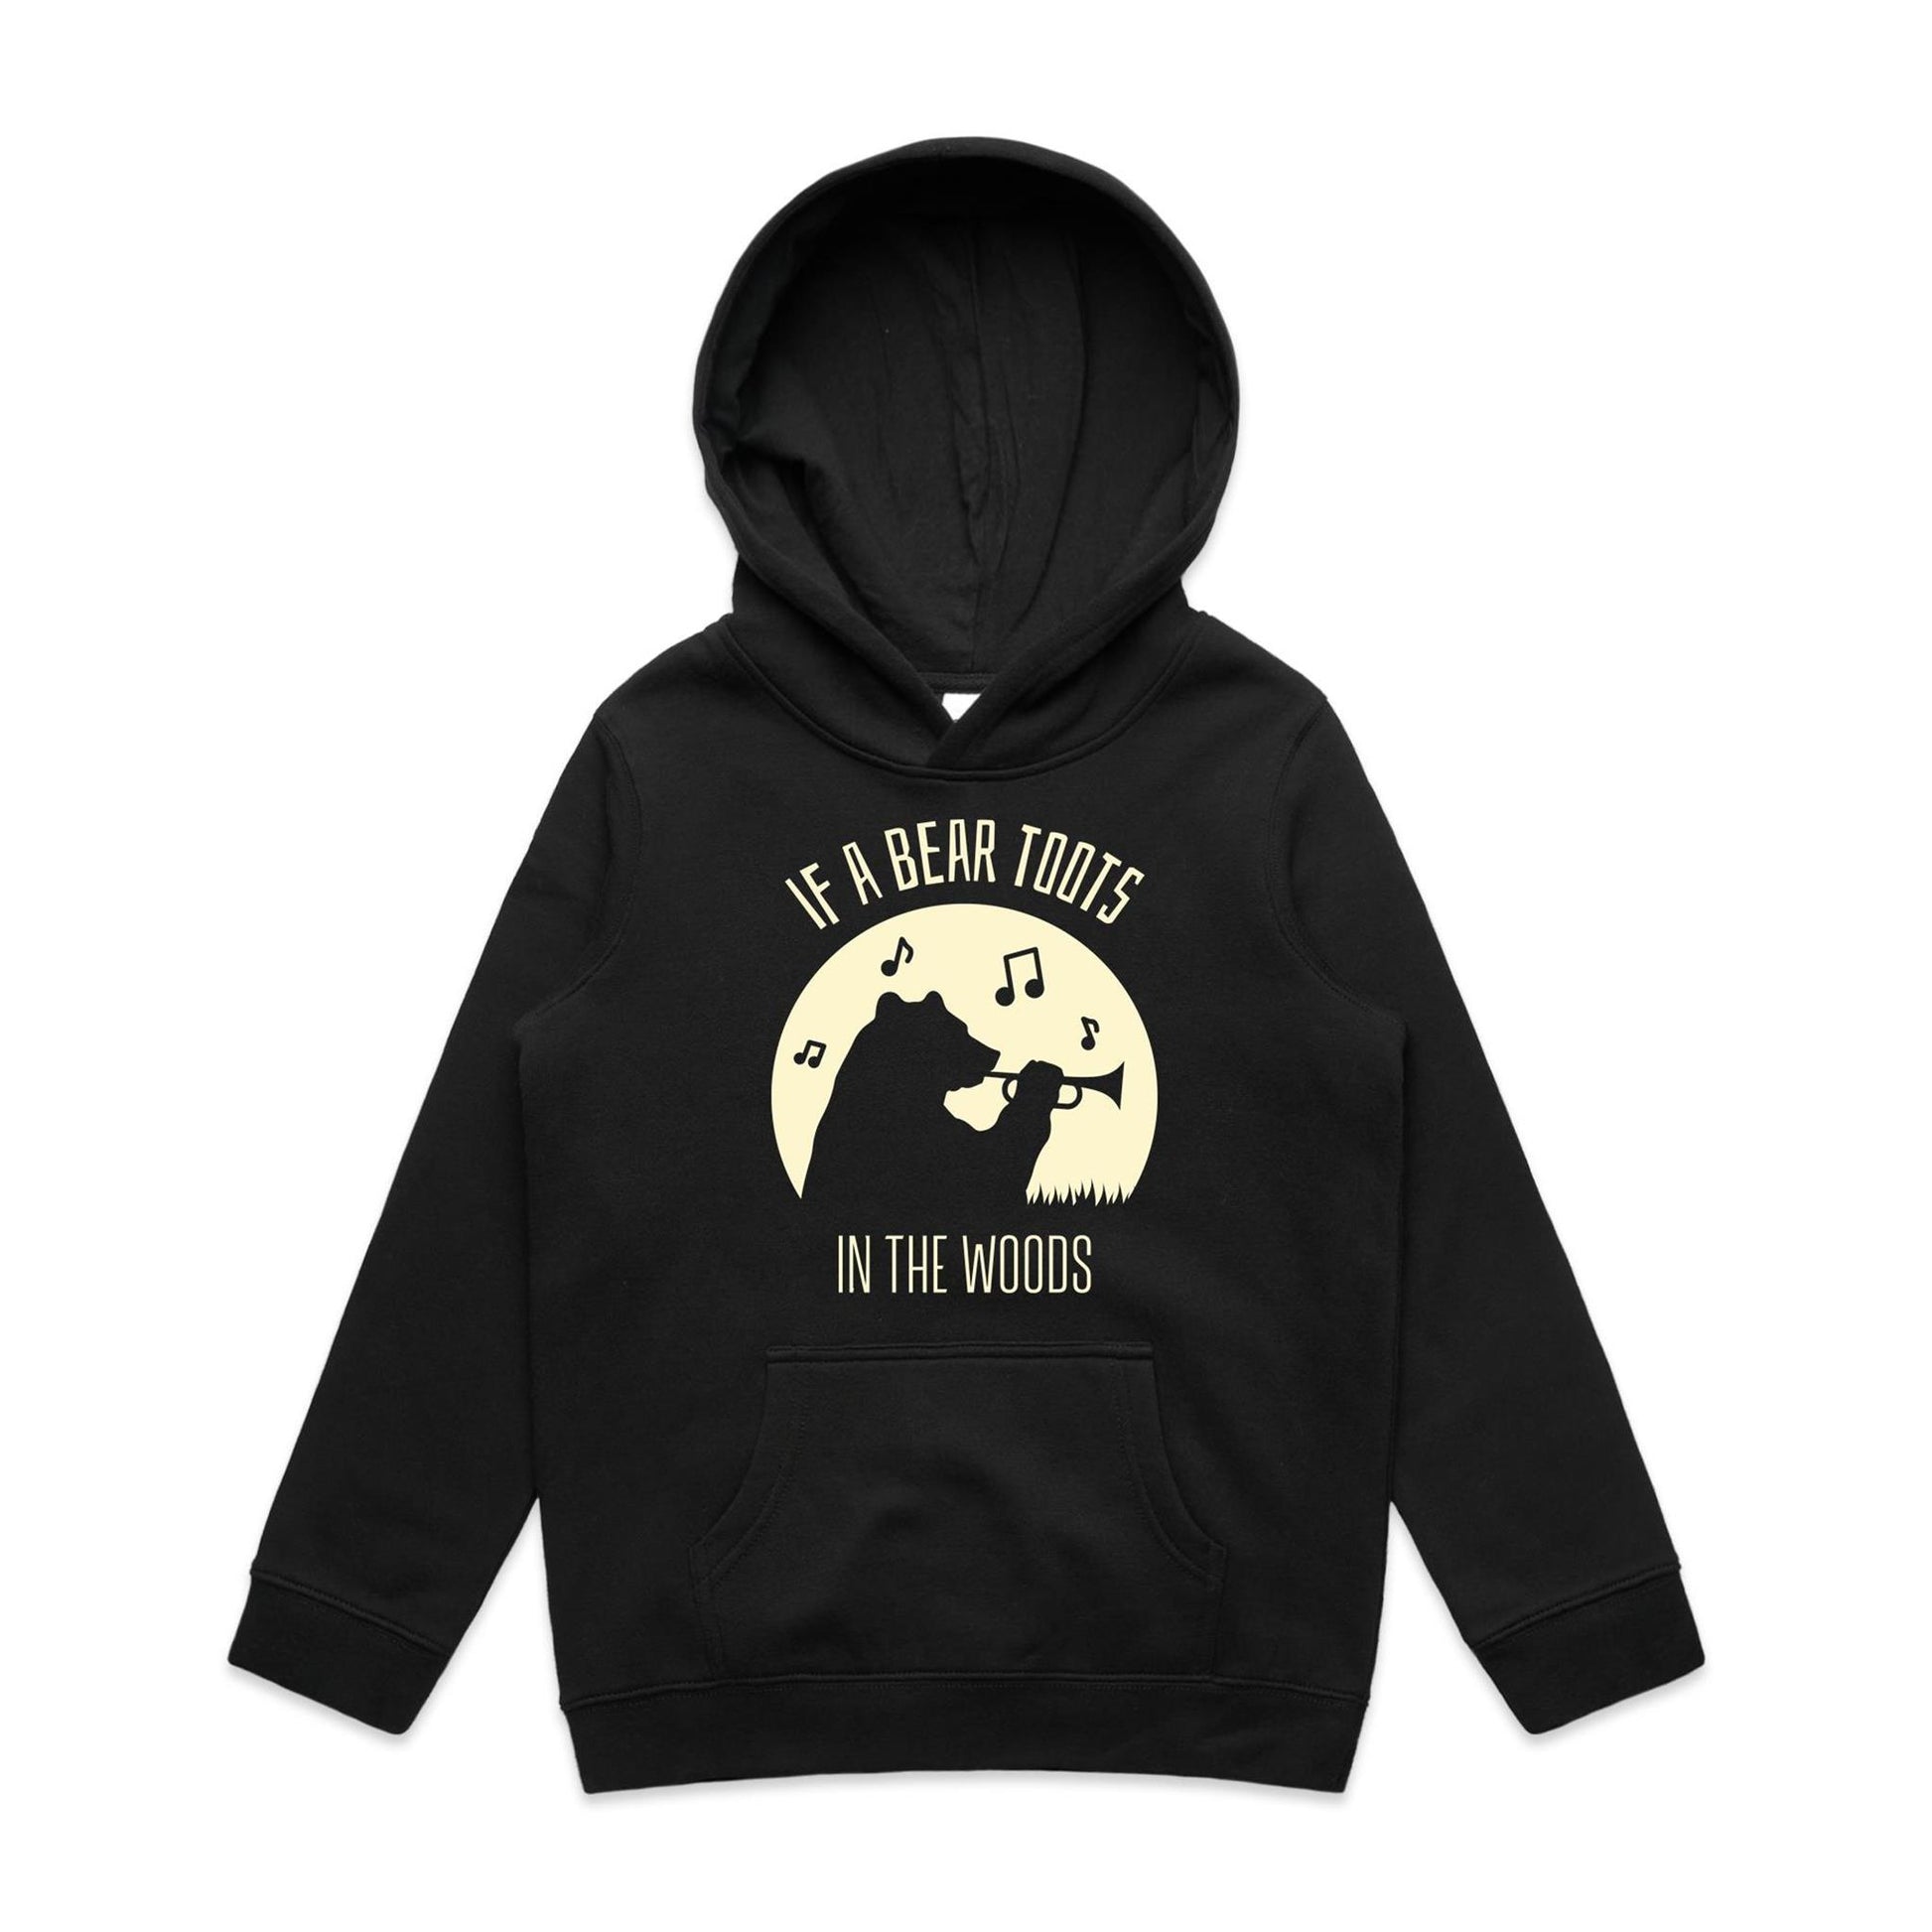 If A Bear Toots In The Woods, Trumpet Player - Youth Supply Hood Black Kids Hoodie